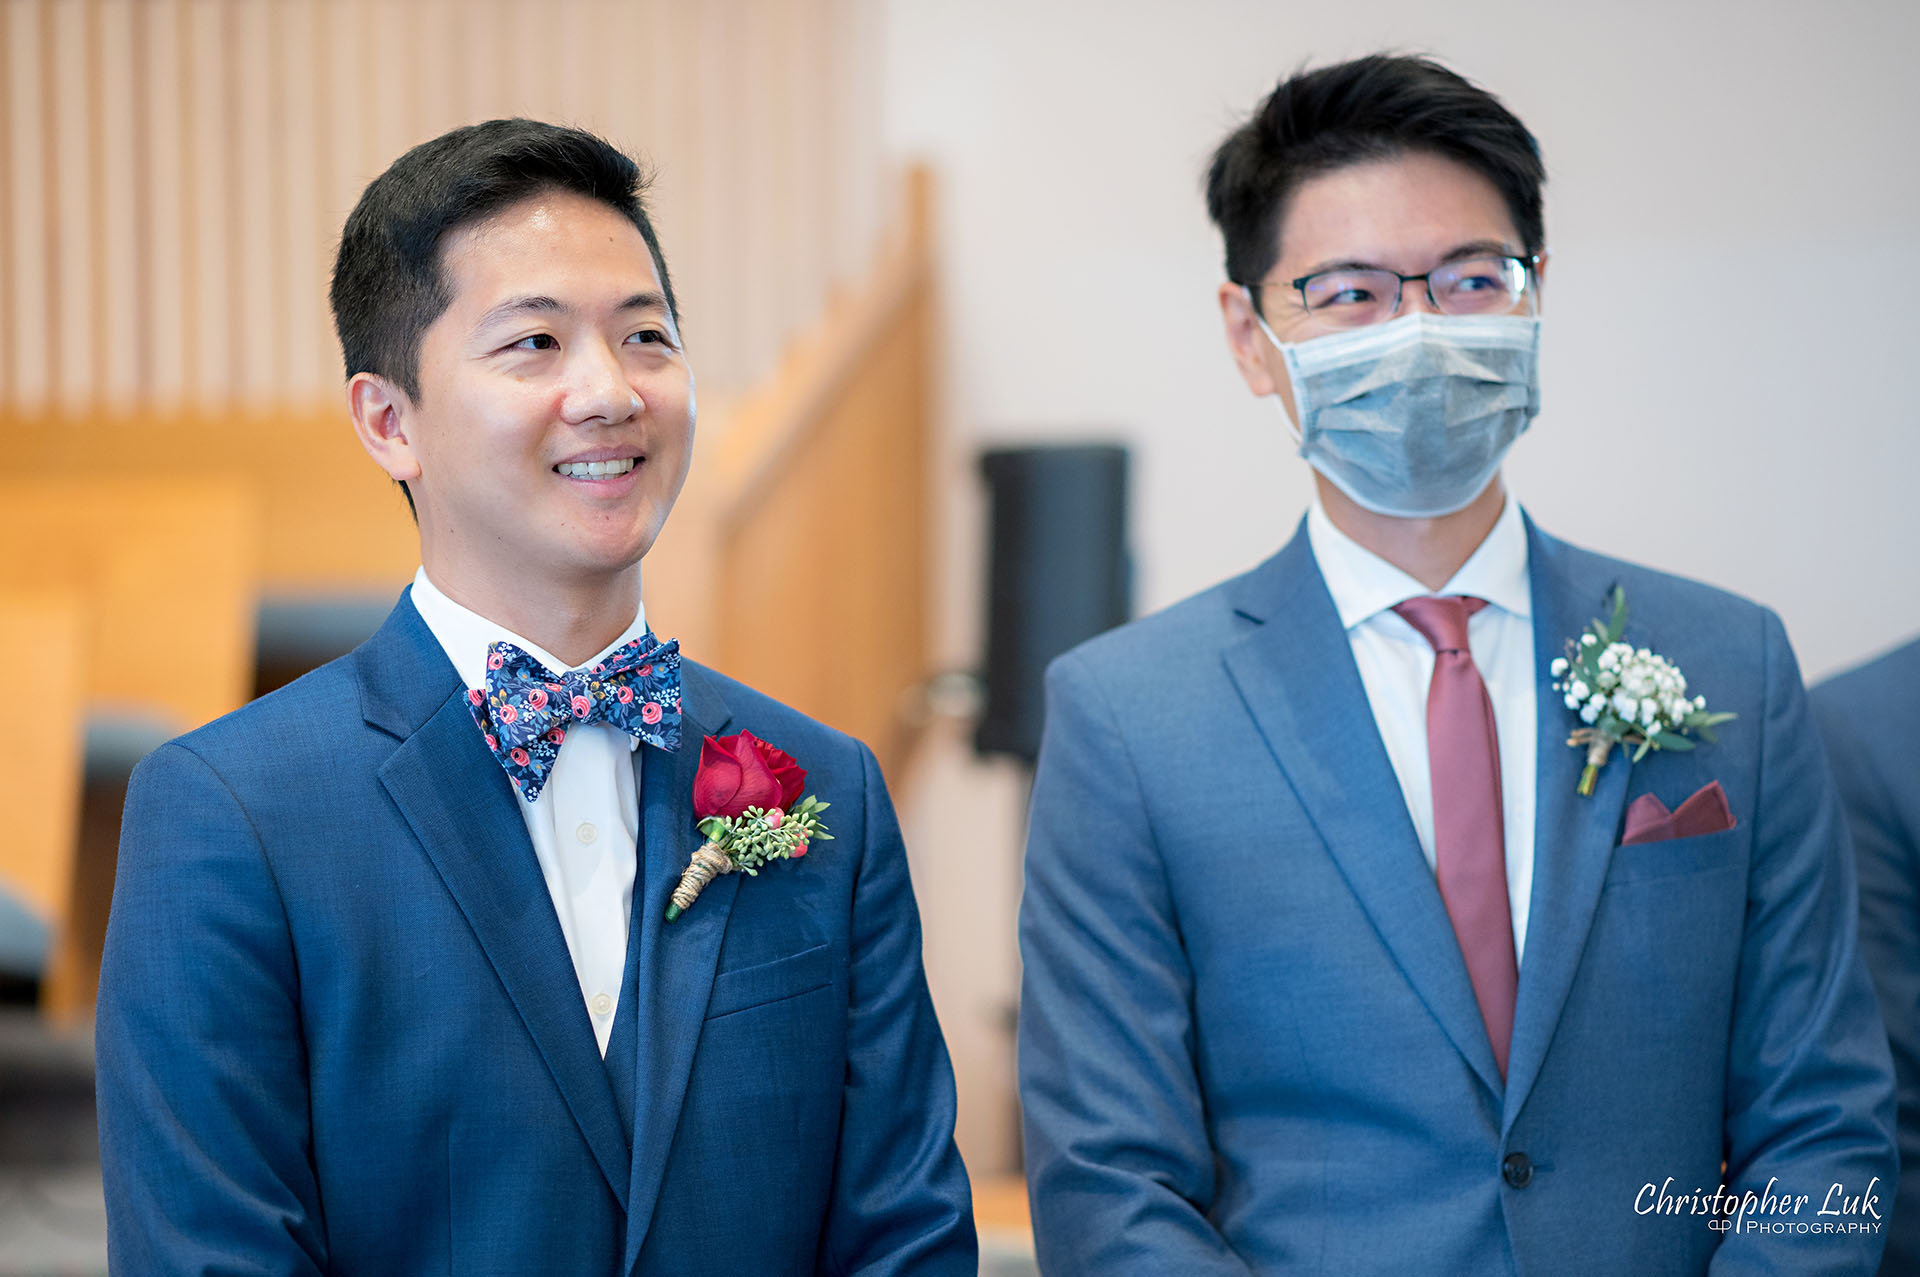 Christopher Luk Toronto Wedding Photographer Bridle Trail Baptist Church Unionville Main Street Crystal Fountain Event Venue Ceremony Location Interior Groom Best Man Bride Walking Down the Aisle Reaction Smile Natural Photojournalistic Candid